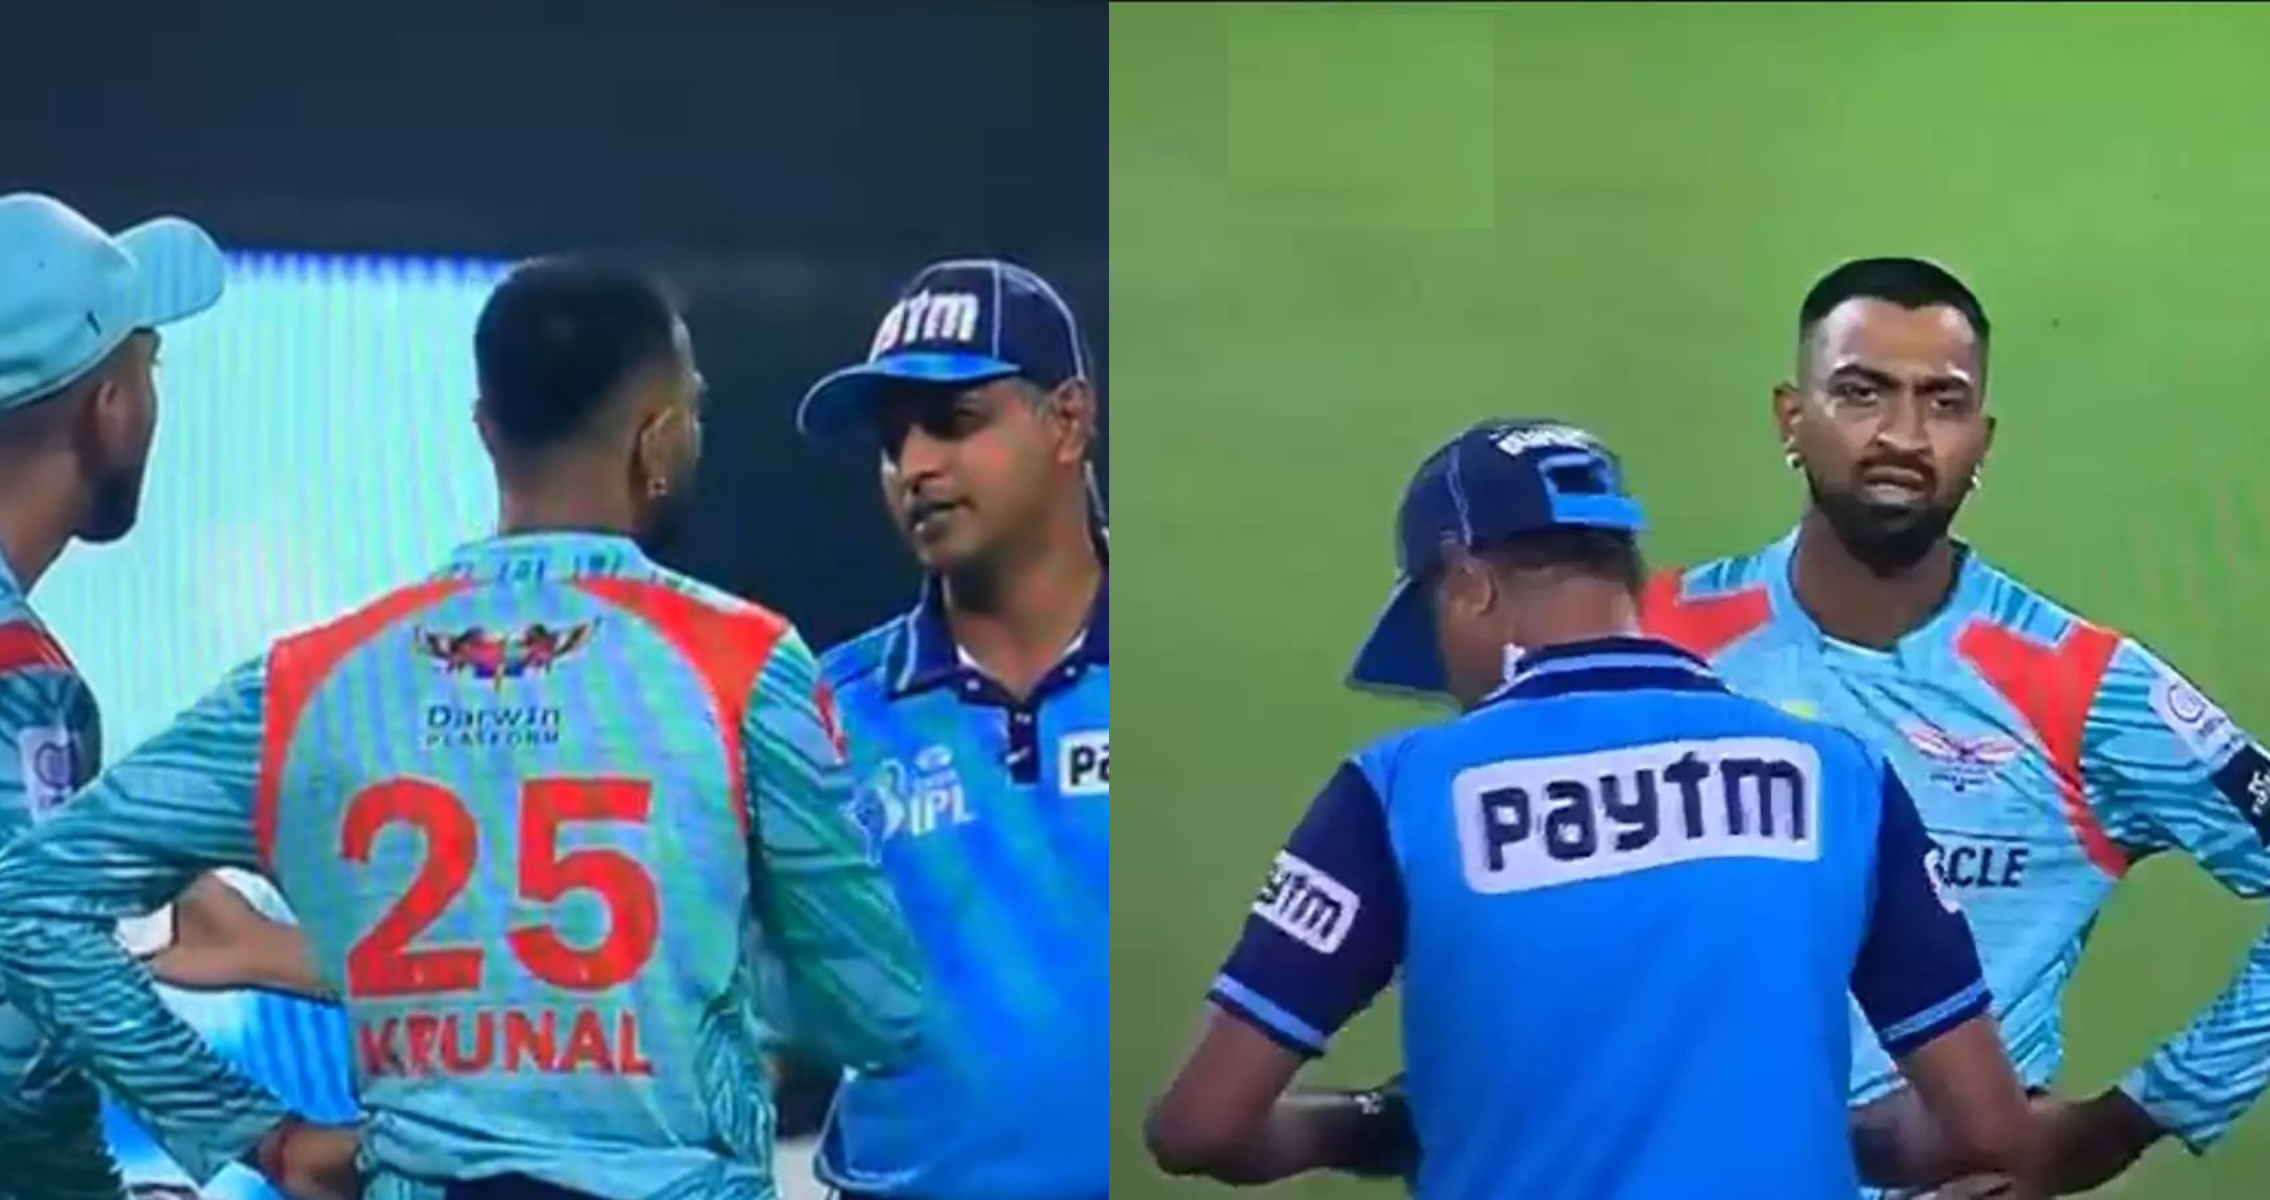 Krunal and Rahul arguing with umpire Madangopal about a no ball | Twitter